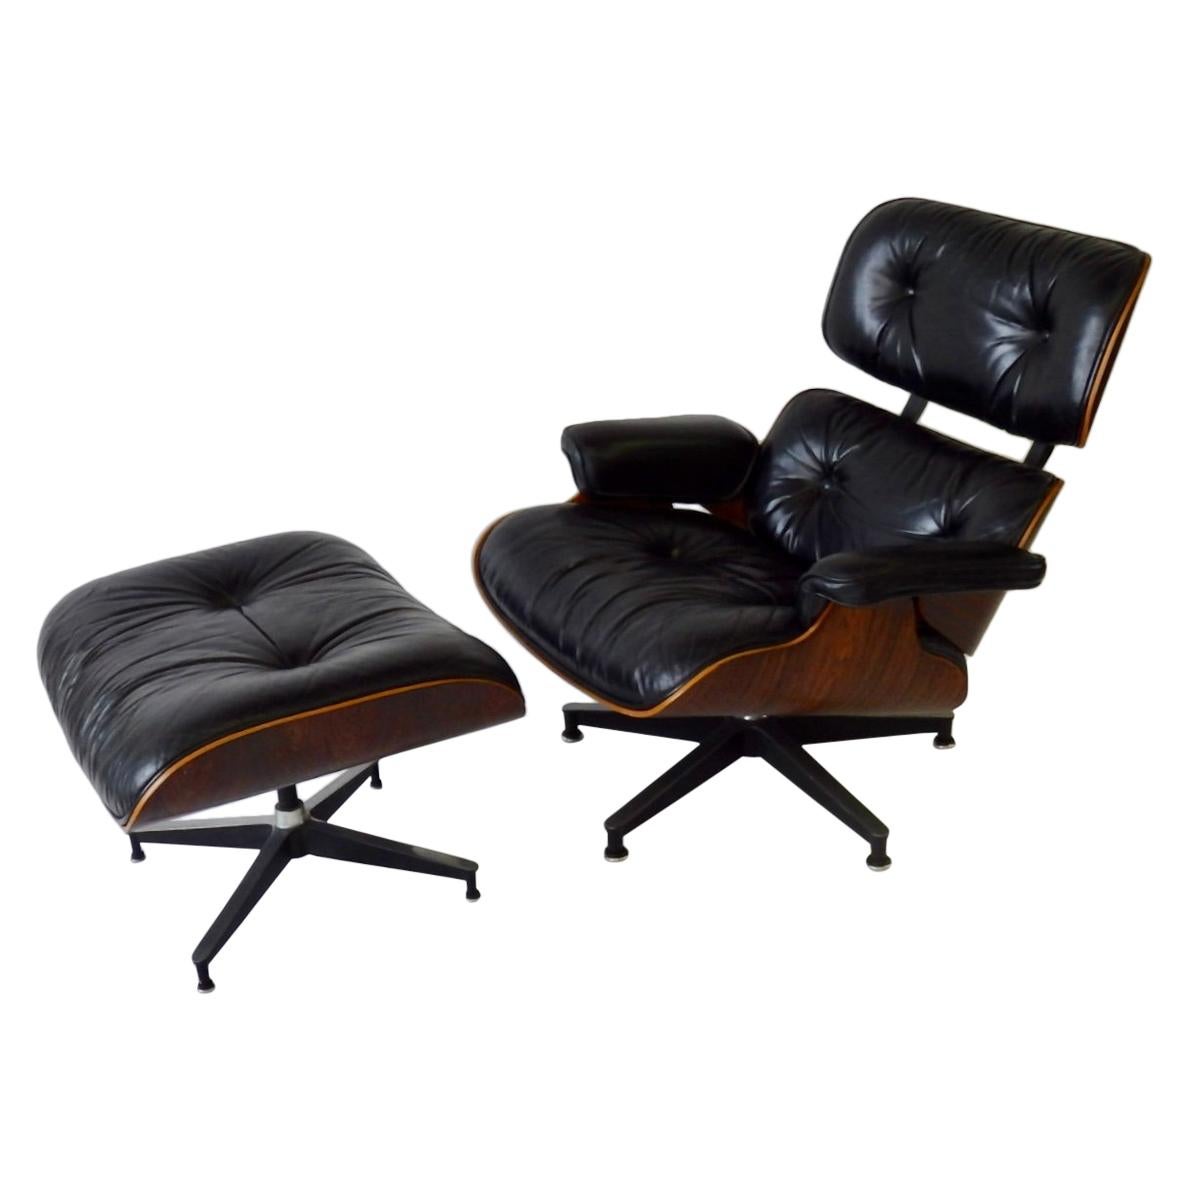 One Owner Estate Charles and Ray Eames Black Leather Lounge Chair with Ottoman